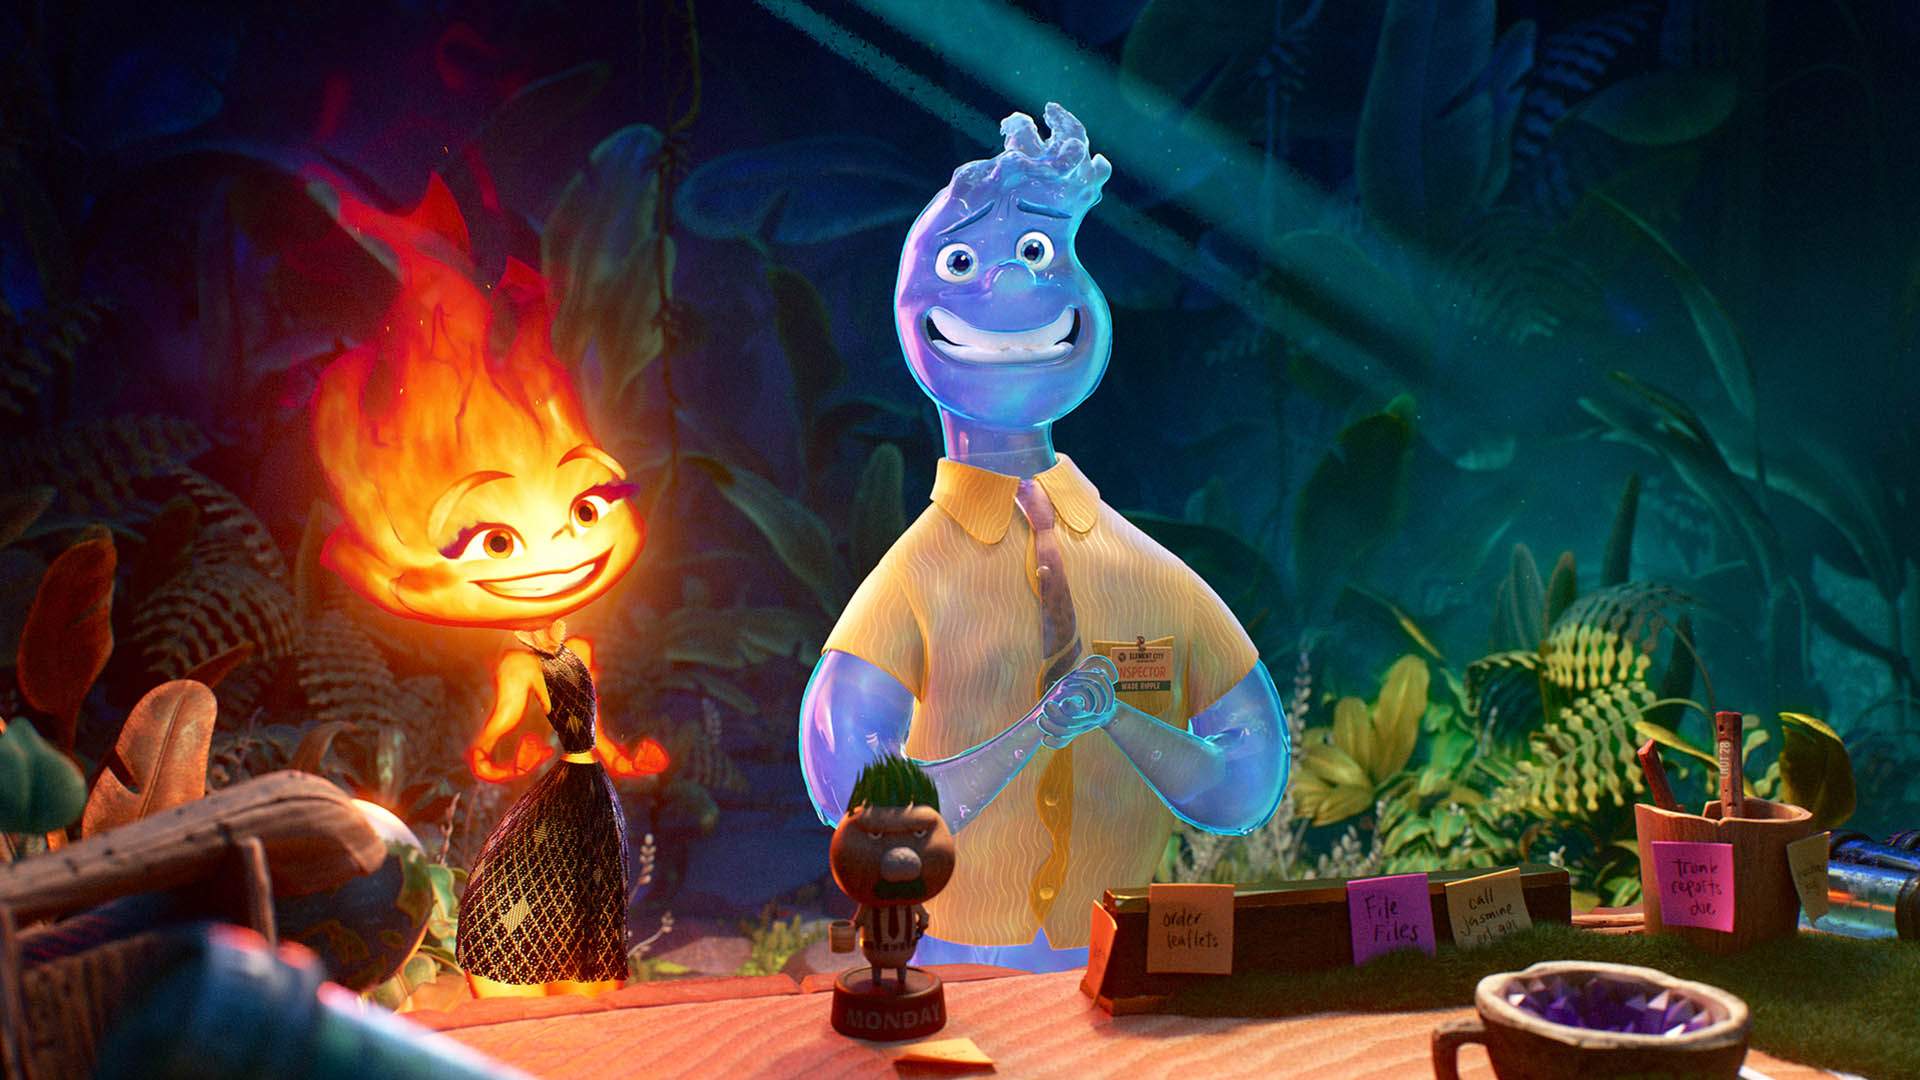 The First Trailer for Pixar's New 'Inside Out'-Style Movie 'Elemental' Is As Adorable As You'd Expect